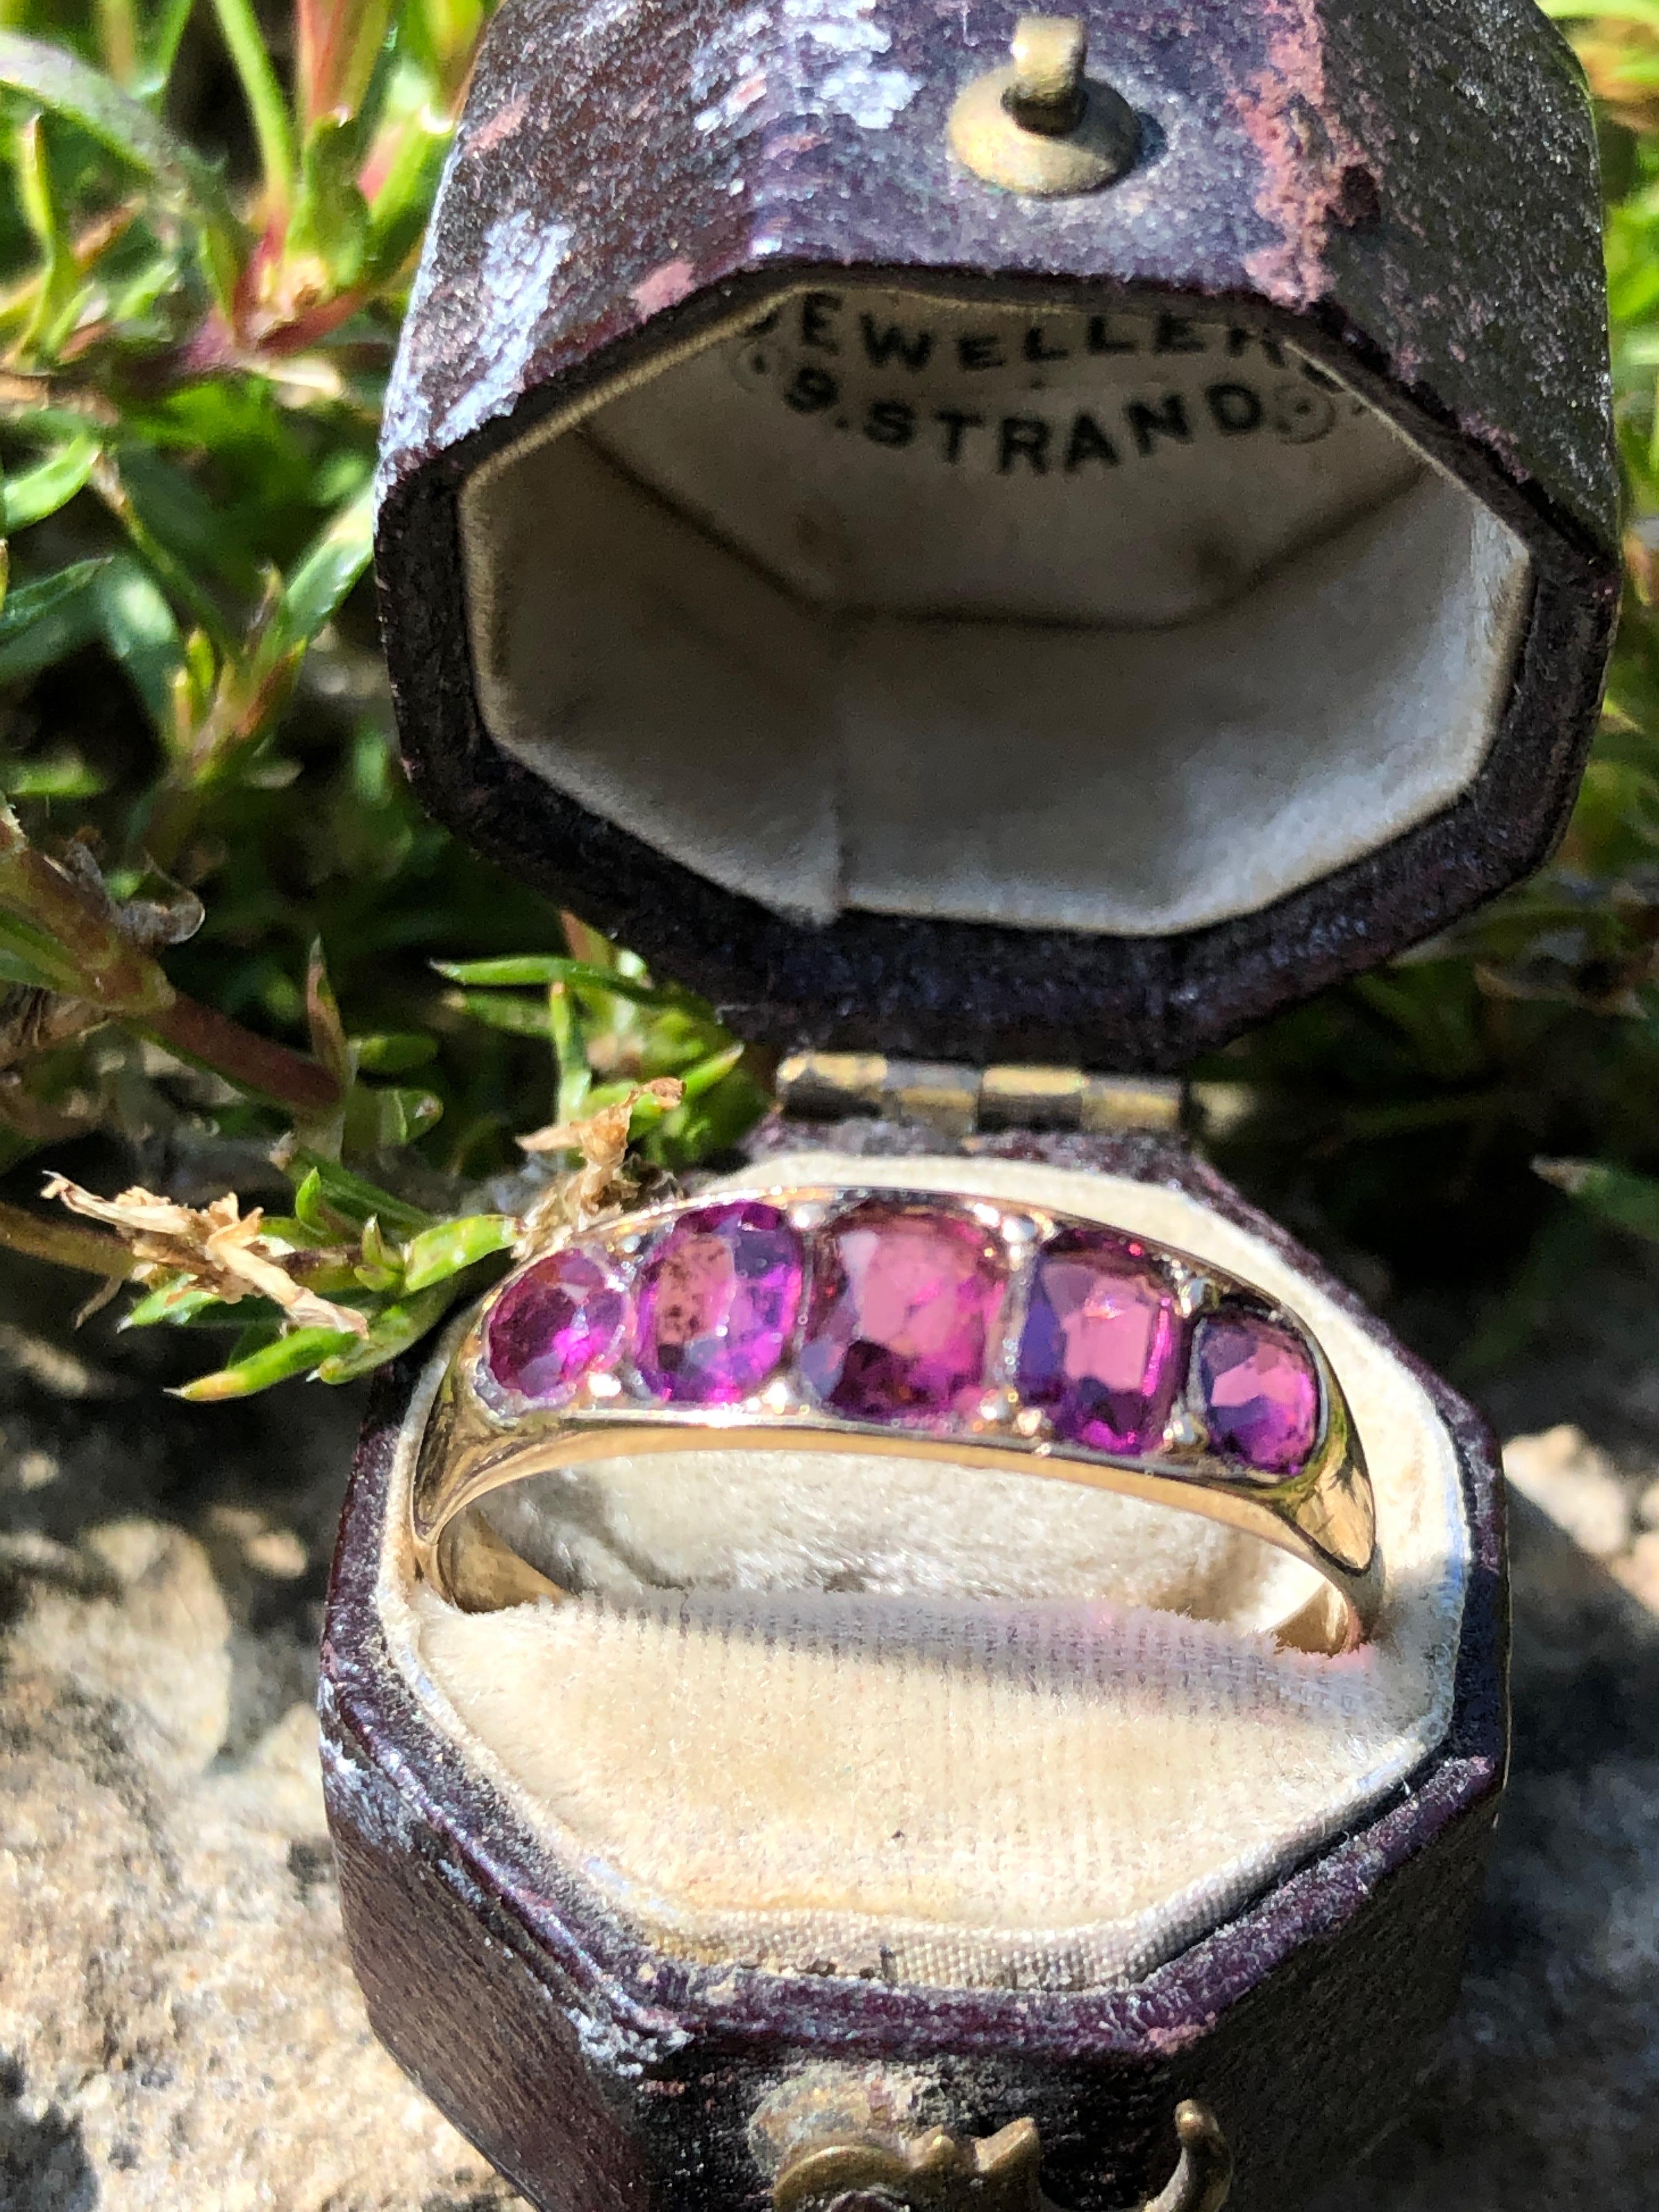 This stunner holds five deep pink tourmaline that are beautifully cut and catch the light just right to get that sparkle. They are set almost flush within the 9ct gold band. 

Ring Size: Q 1/2 or 8 1/2
Band Width: 5mm

Weight: 2g